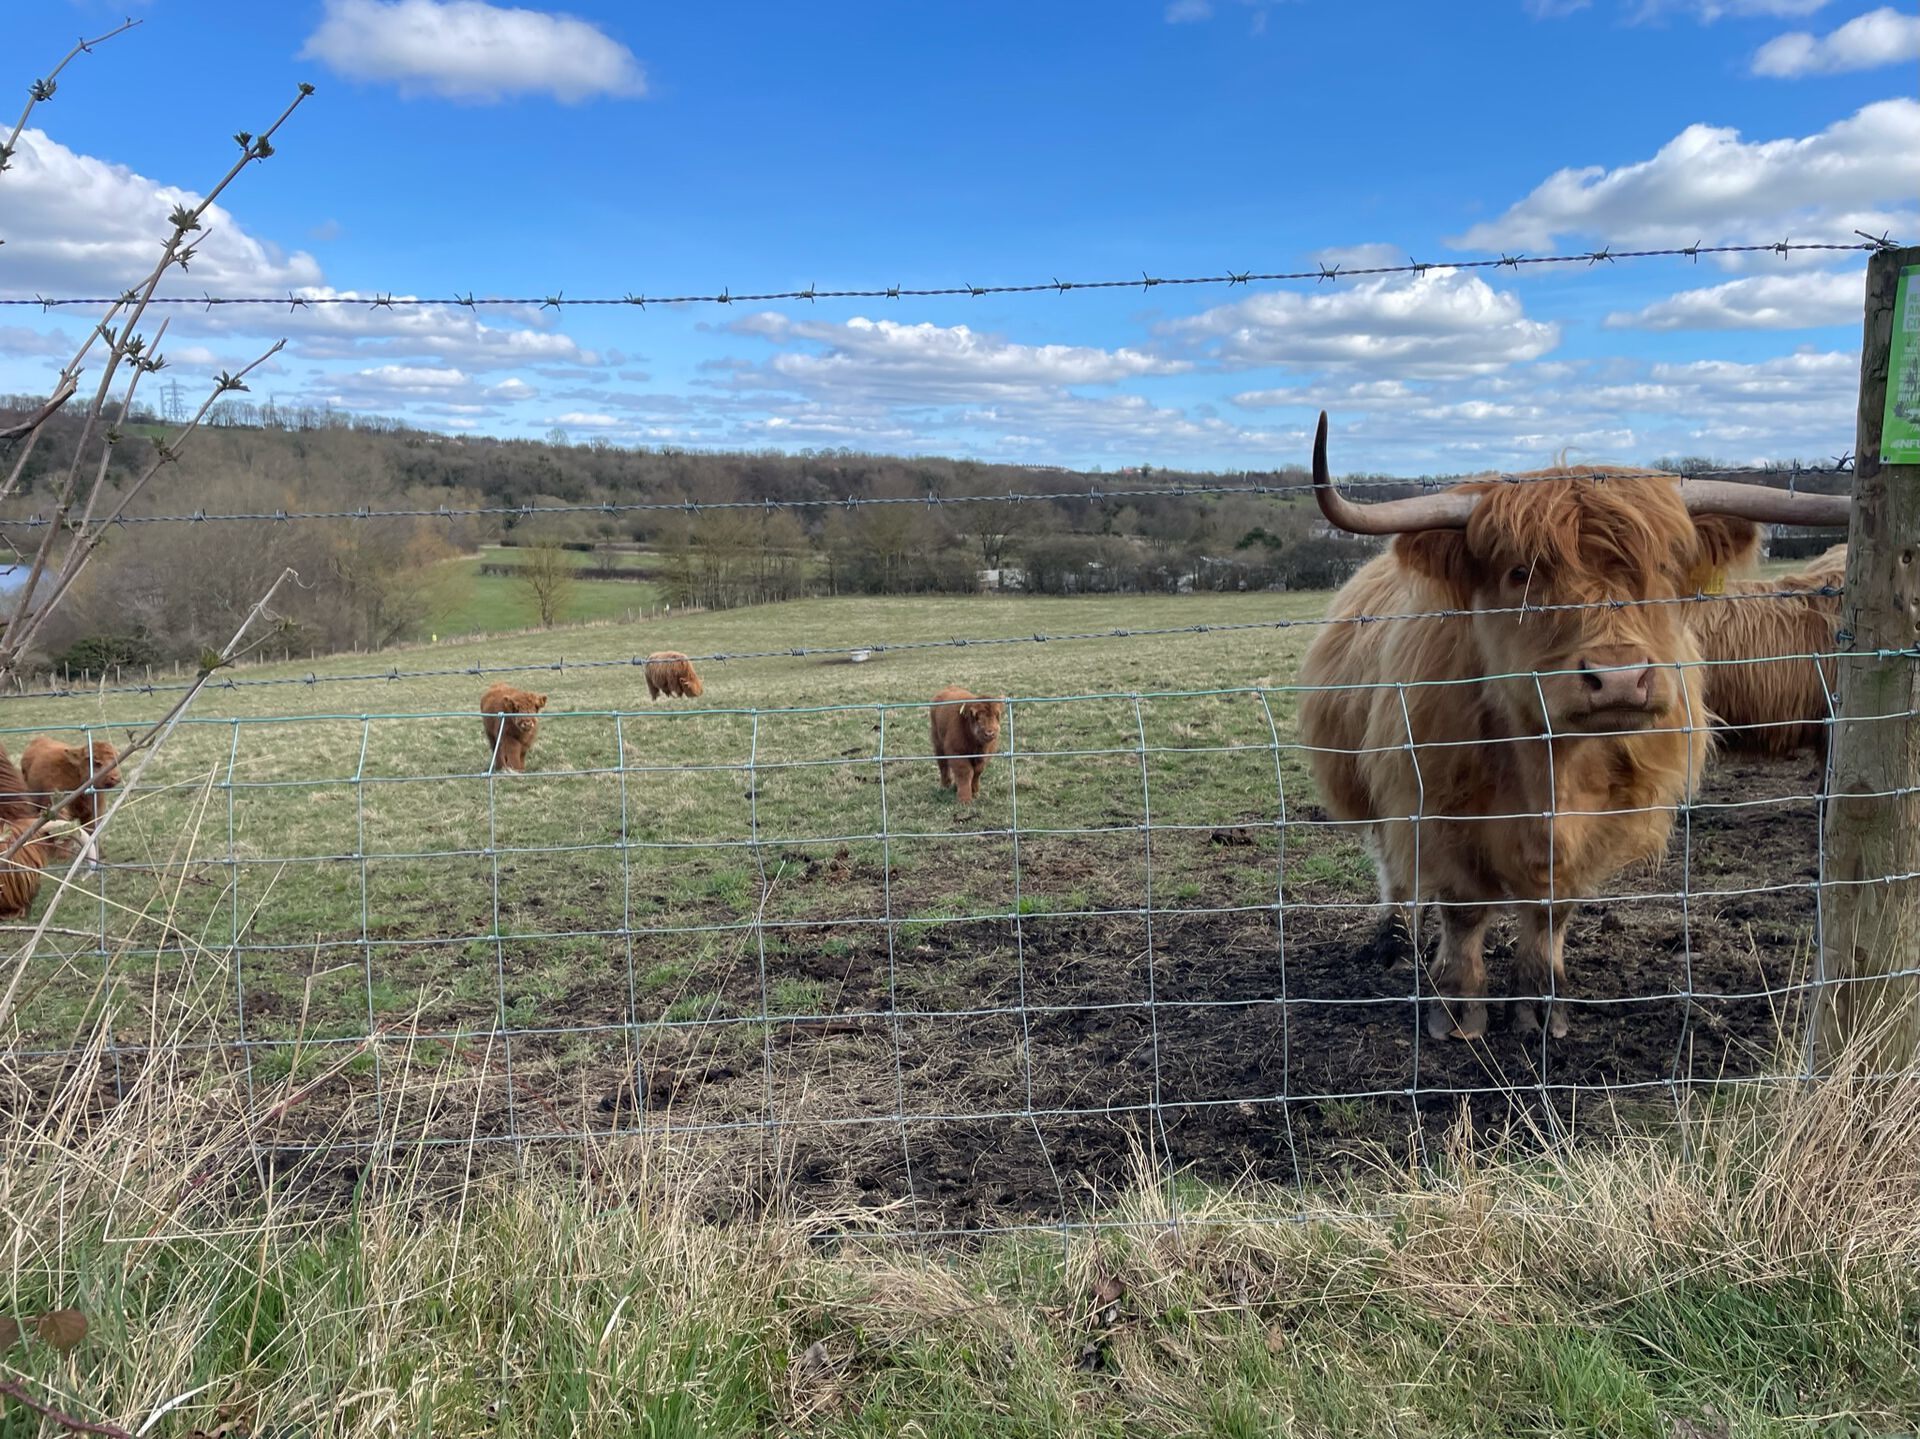 Some highland cows & cowlets just outside of Escomb